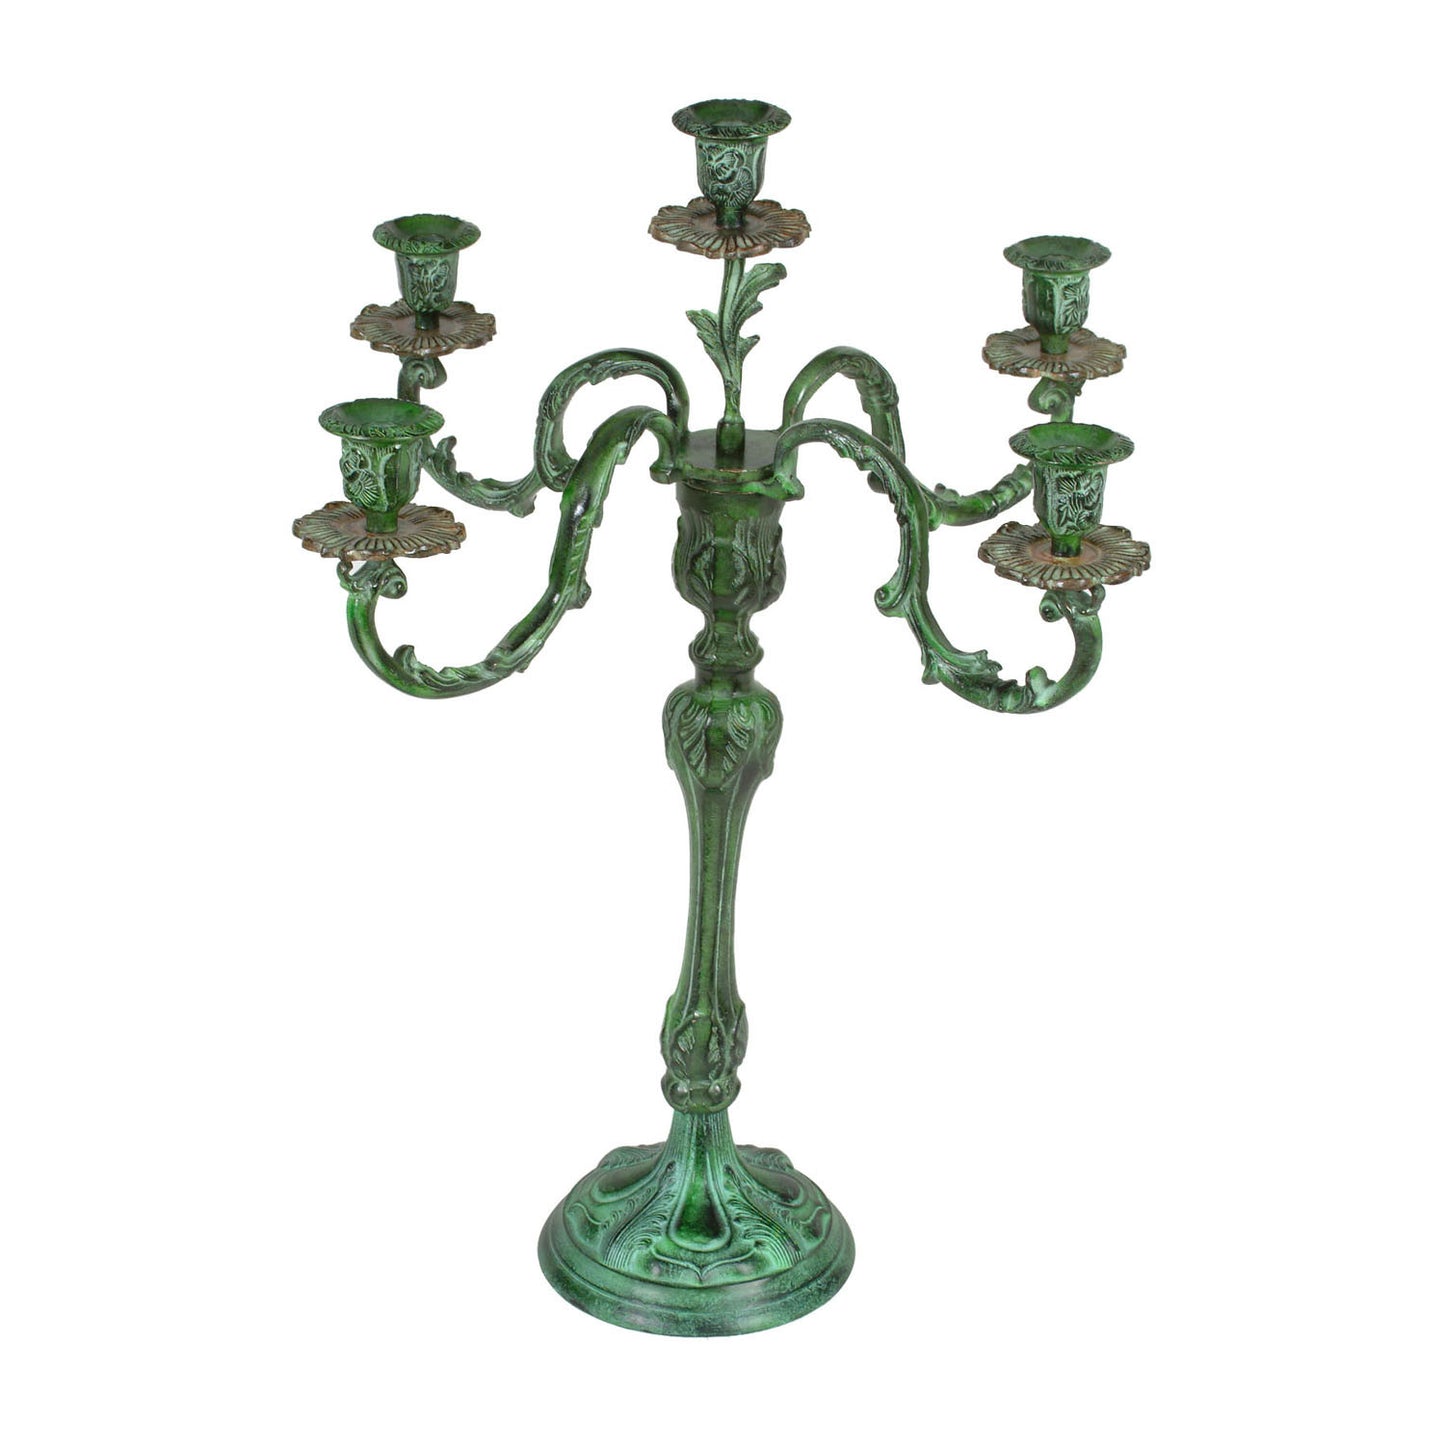 GiftBay 4005 Wedding Candelabra with 5 Holders, Made of Solid Brass, Colored Patina, 26"H and 22"W